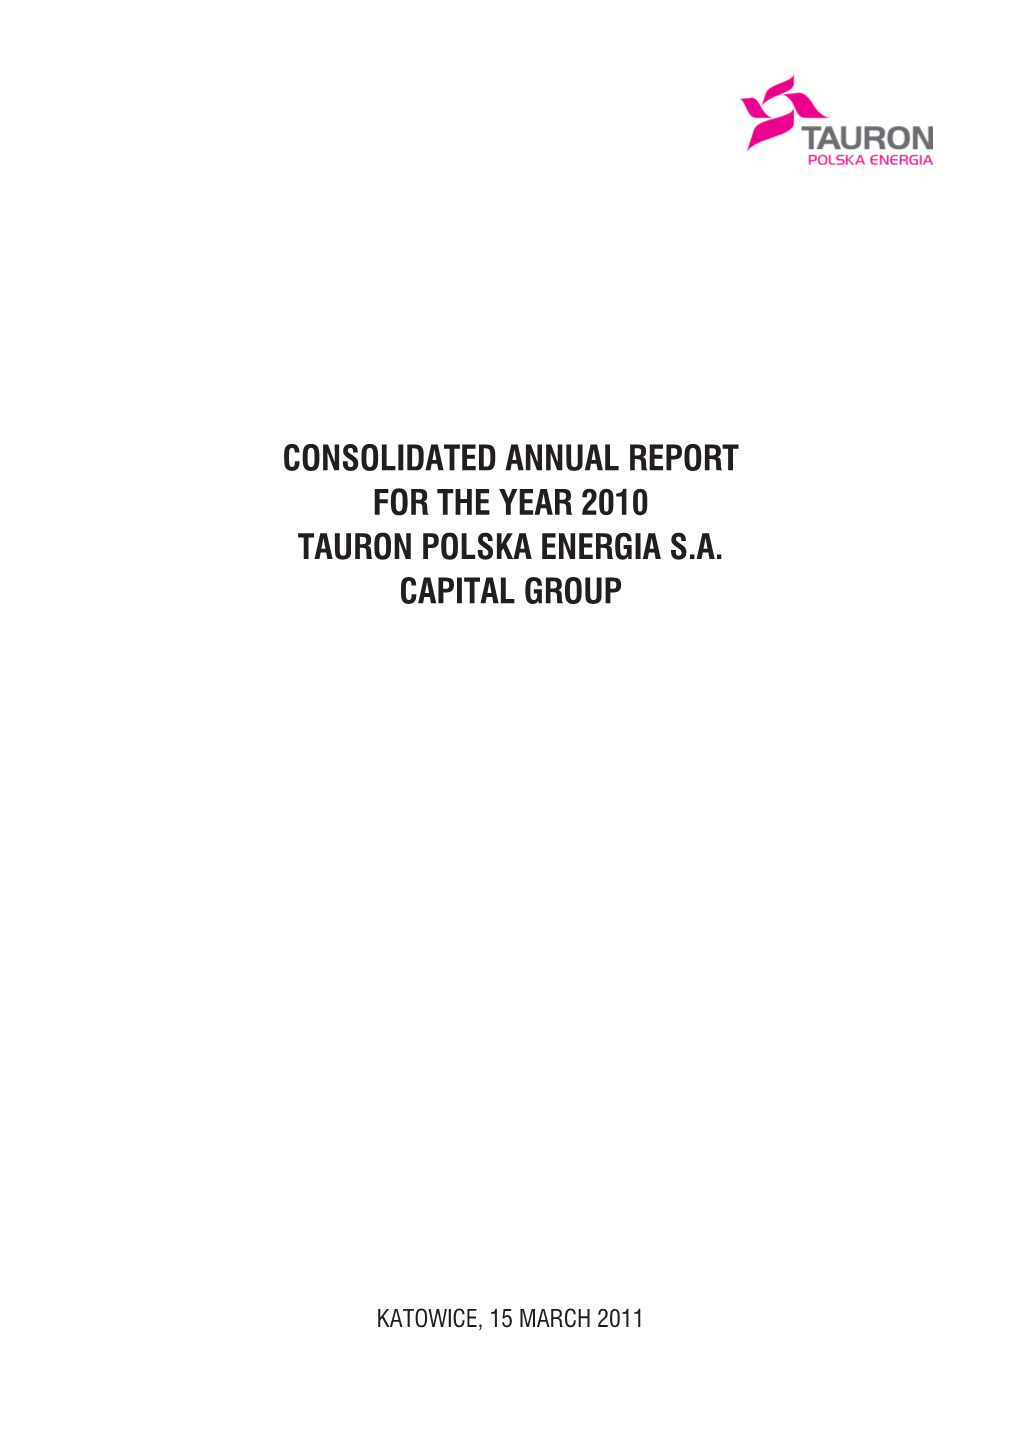 Consolidated Annual Report for the Year 2010 Tauron Polska Energia S.A